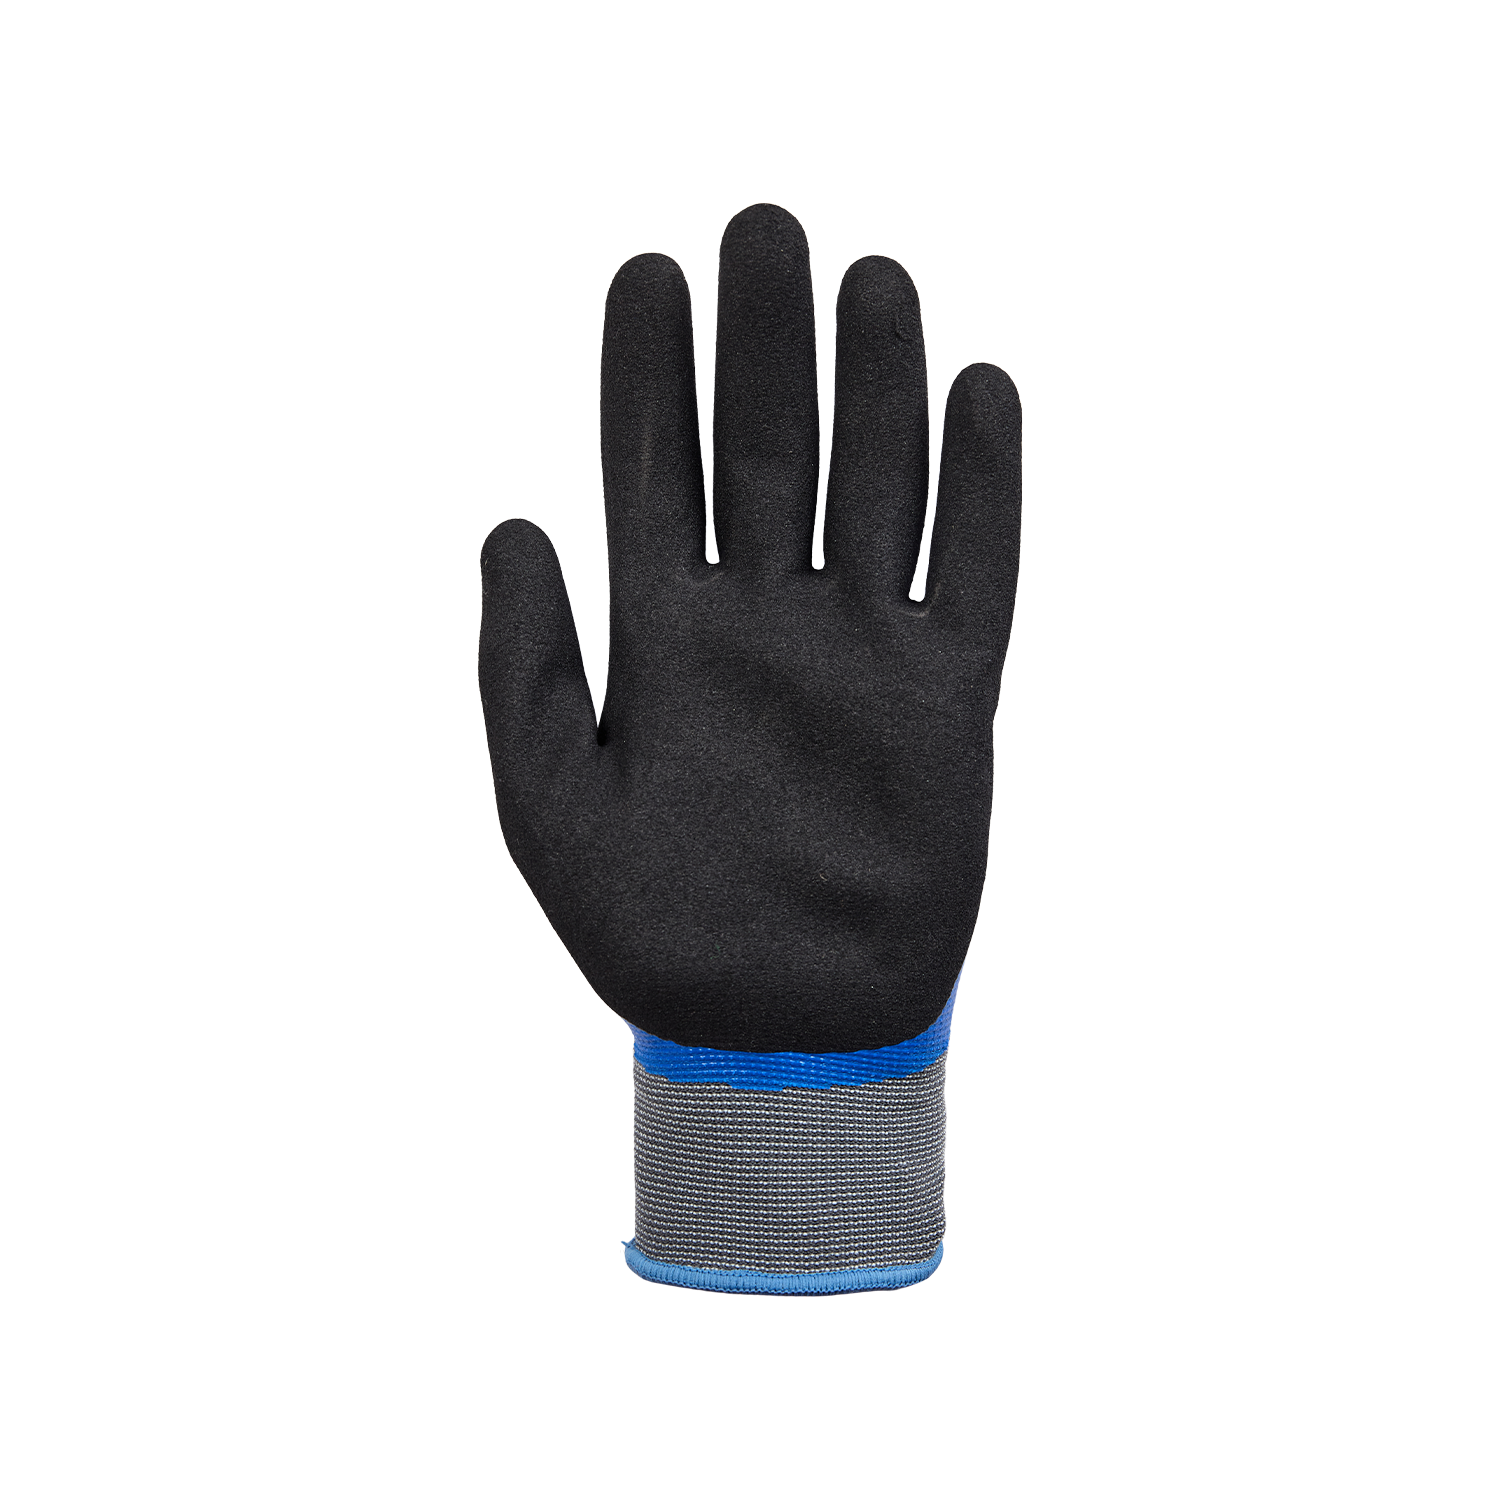 NORSE Waterproof assembly gloves size 11